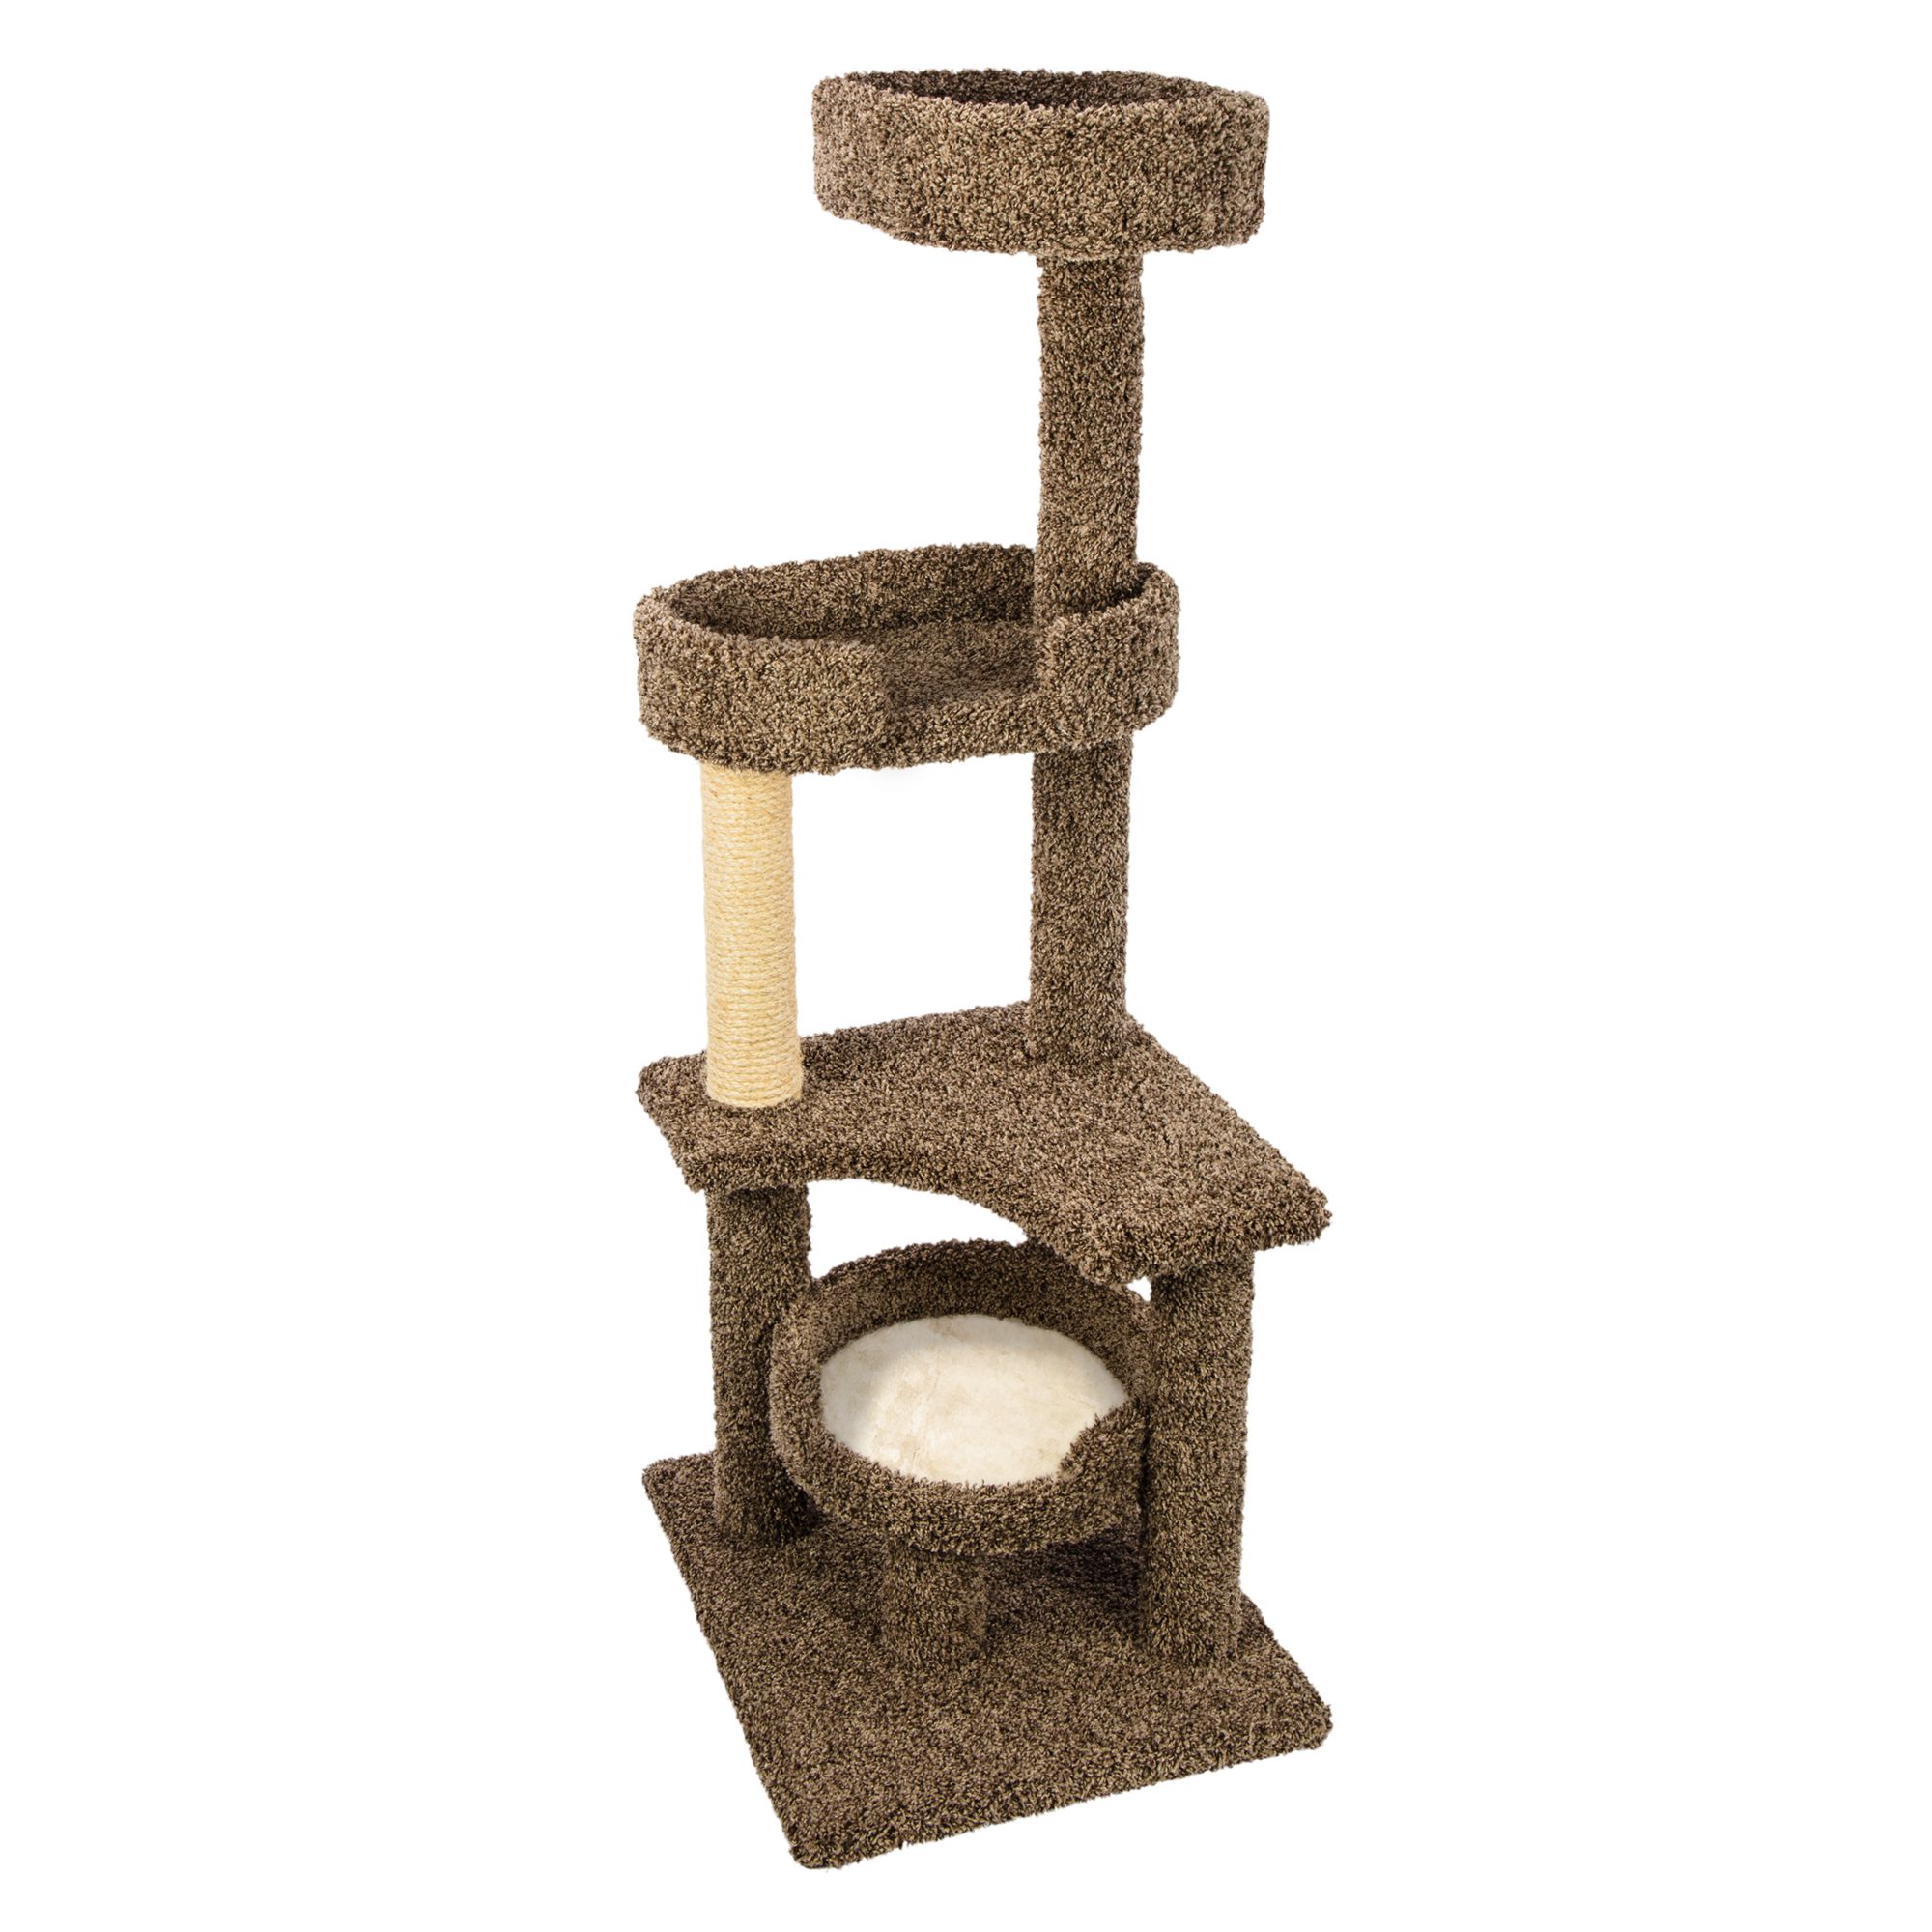 cat tree with two beds